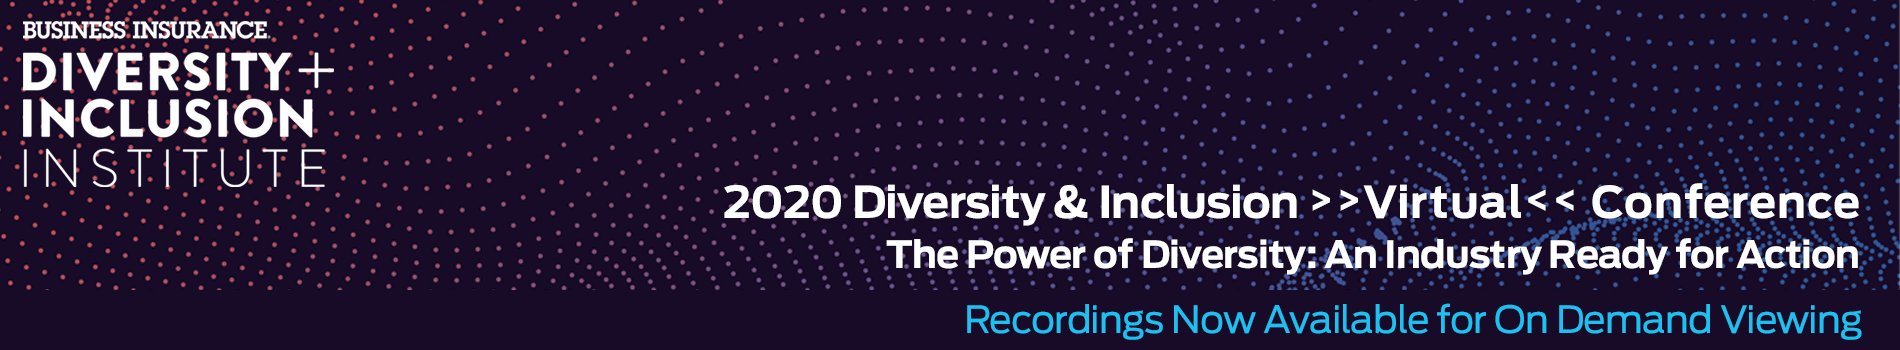 2020 DIVERSITY & INCLUSION VIRTUAL LEADERSHIP CONFERENCE